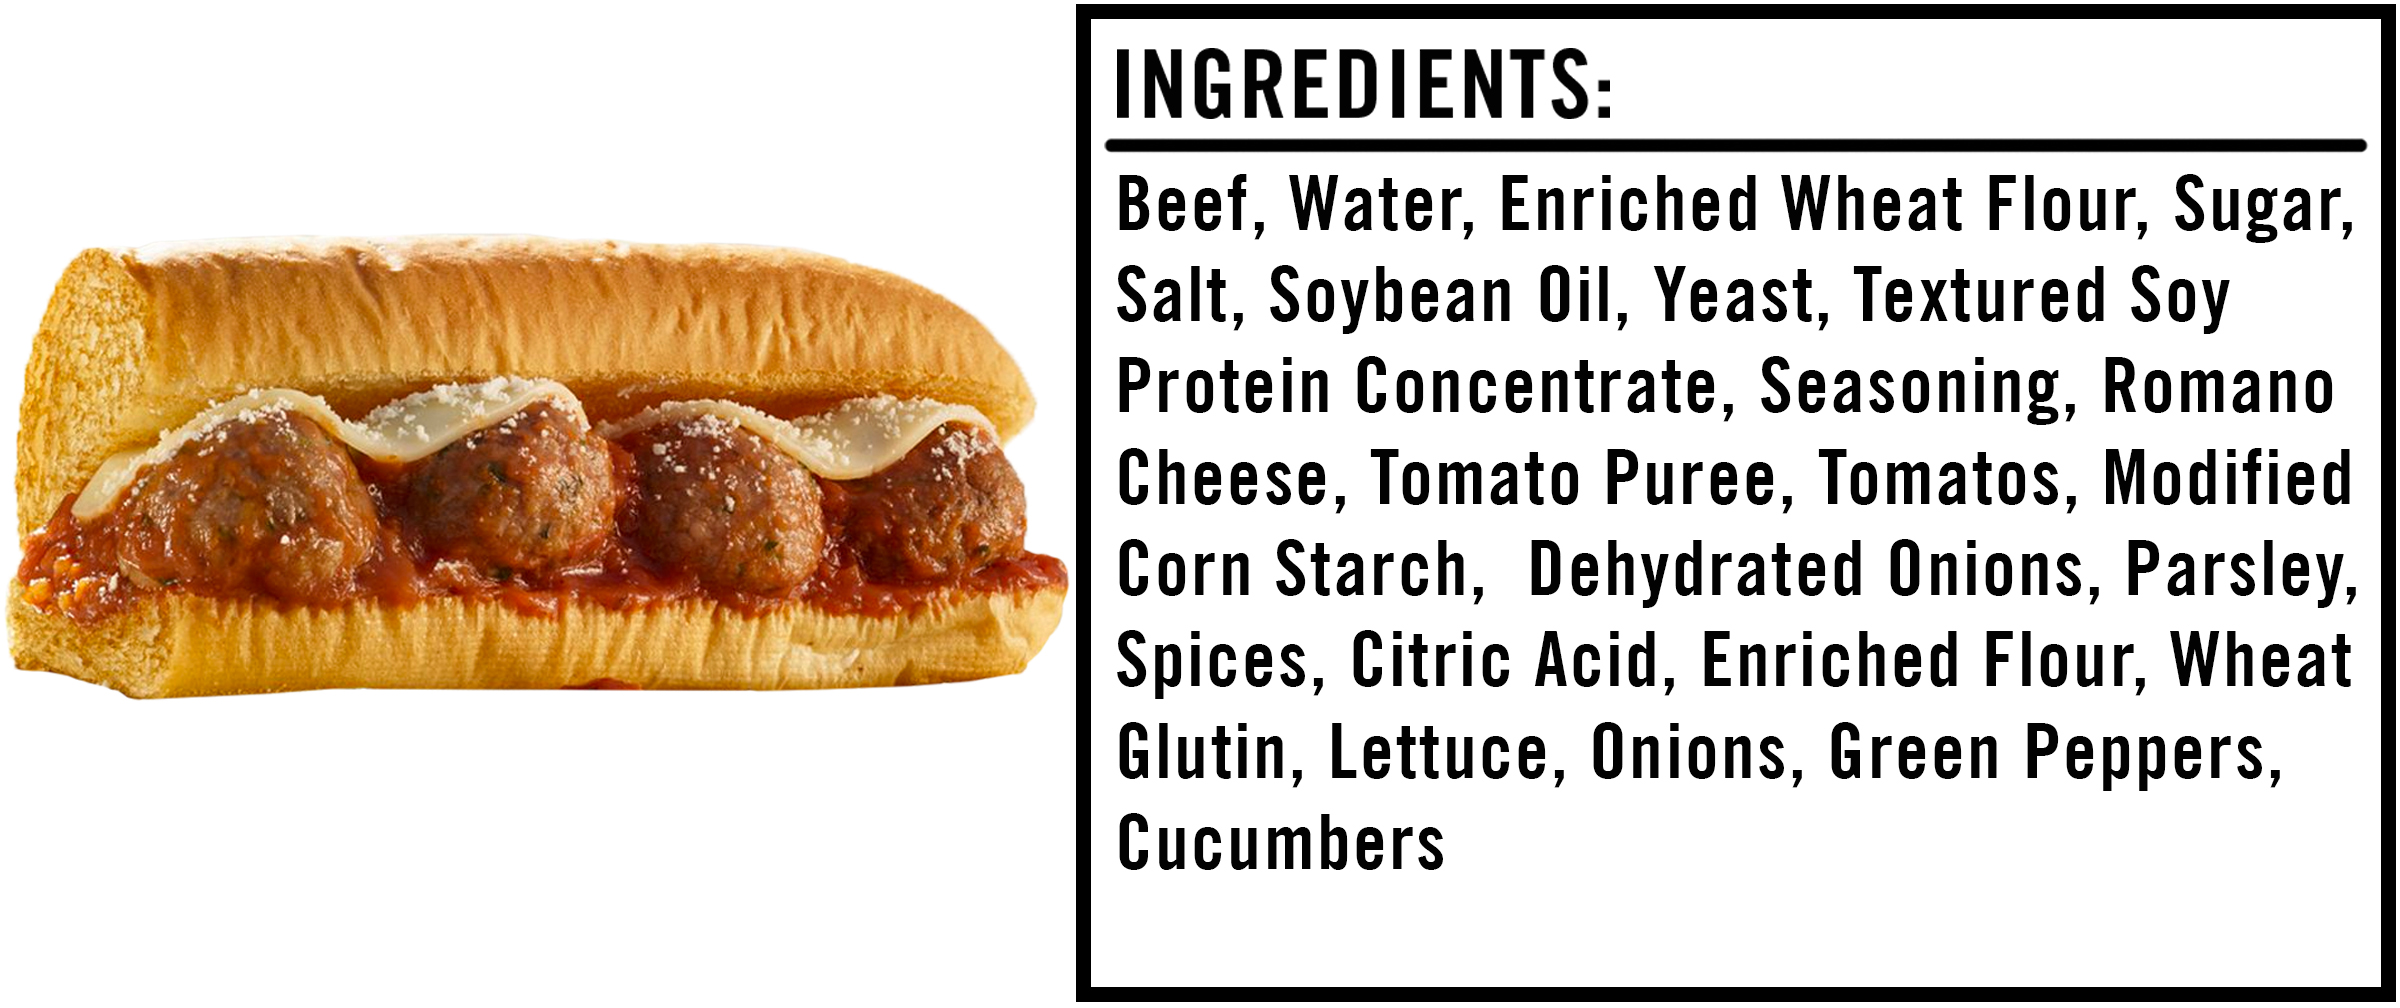 meatball-marinara-subway-all-the-ingredients-in-this-fast-food-classic